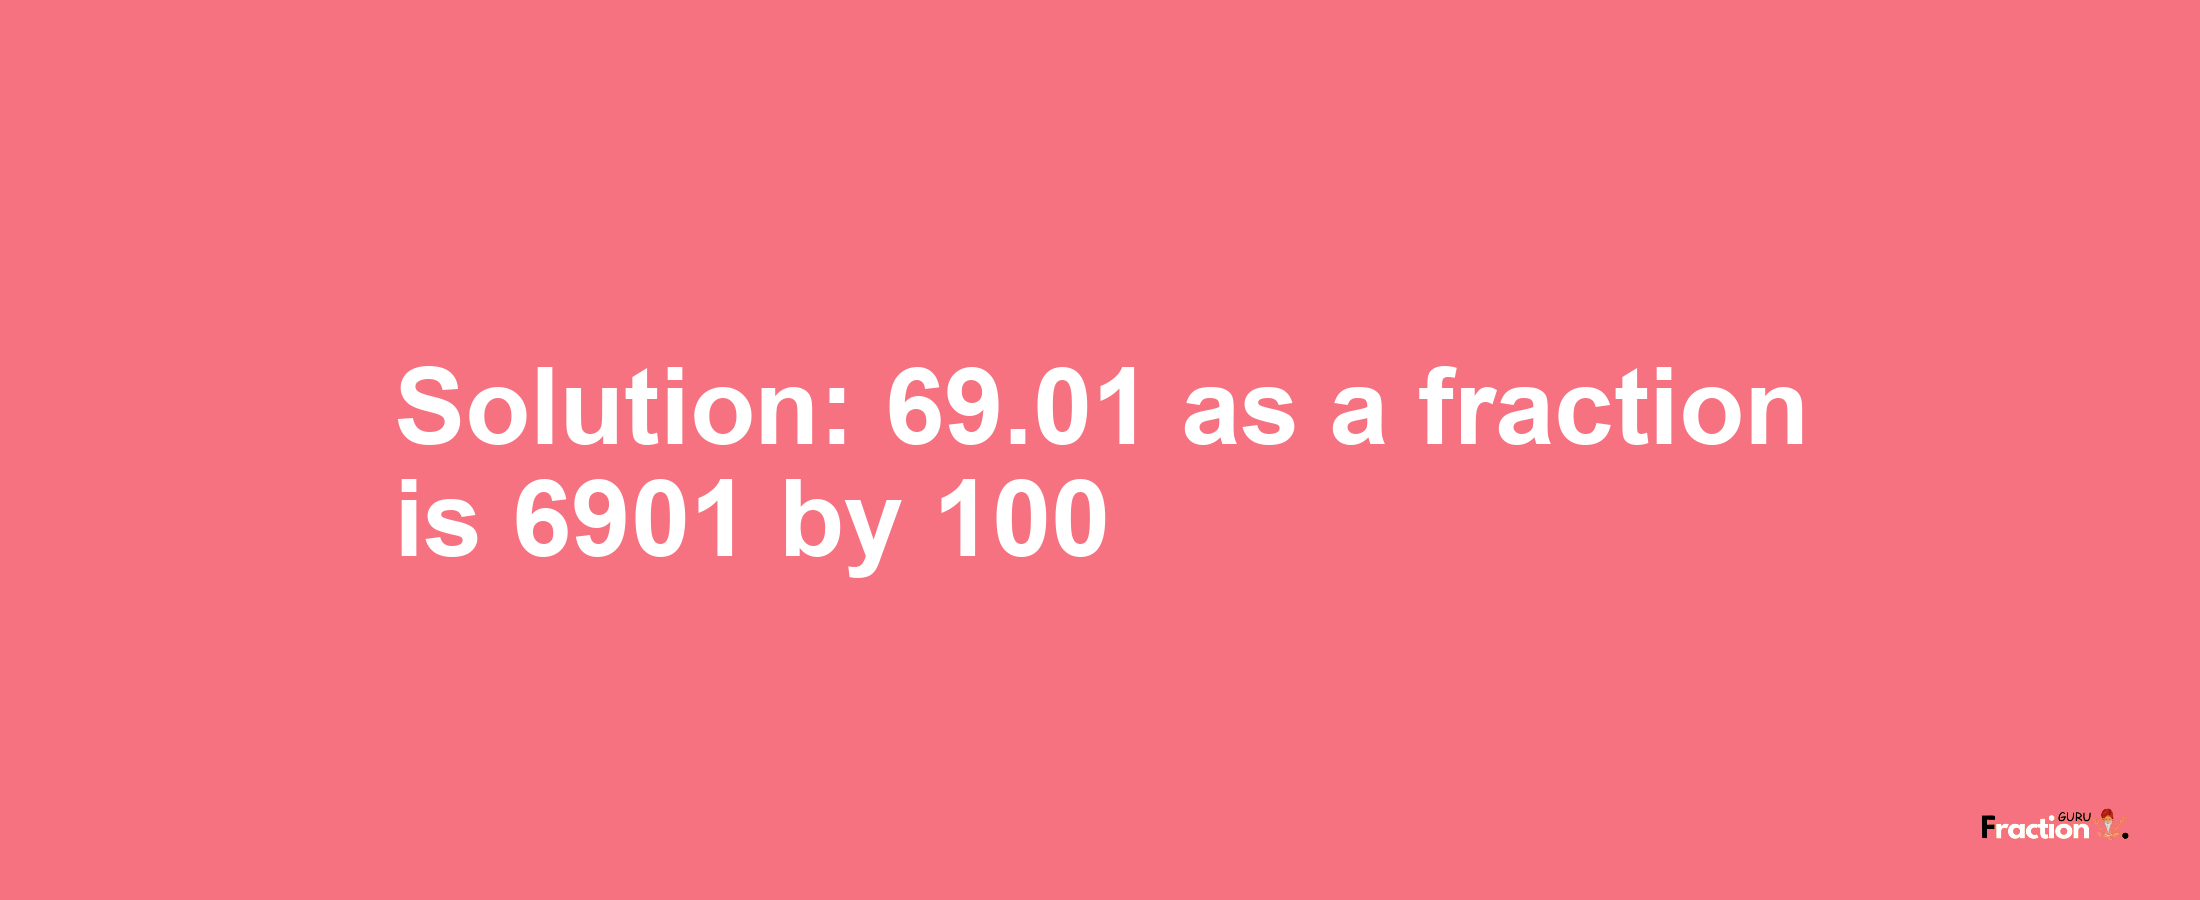 Solution:69.01 as a fraction is 6901/100